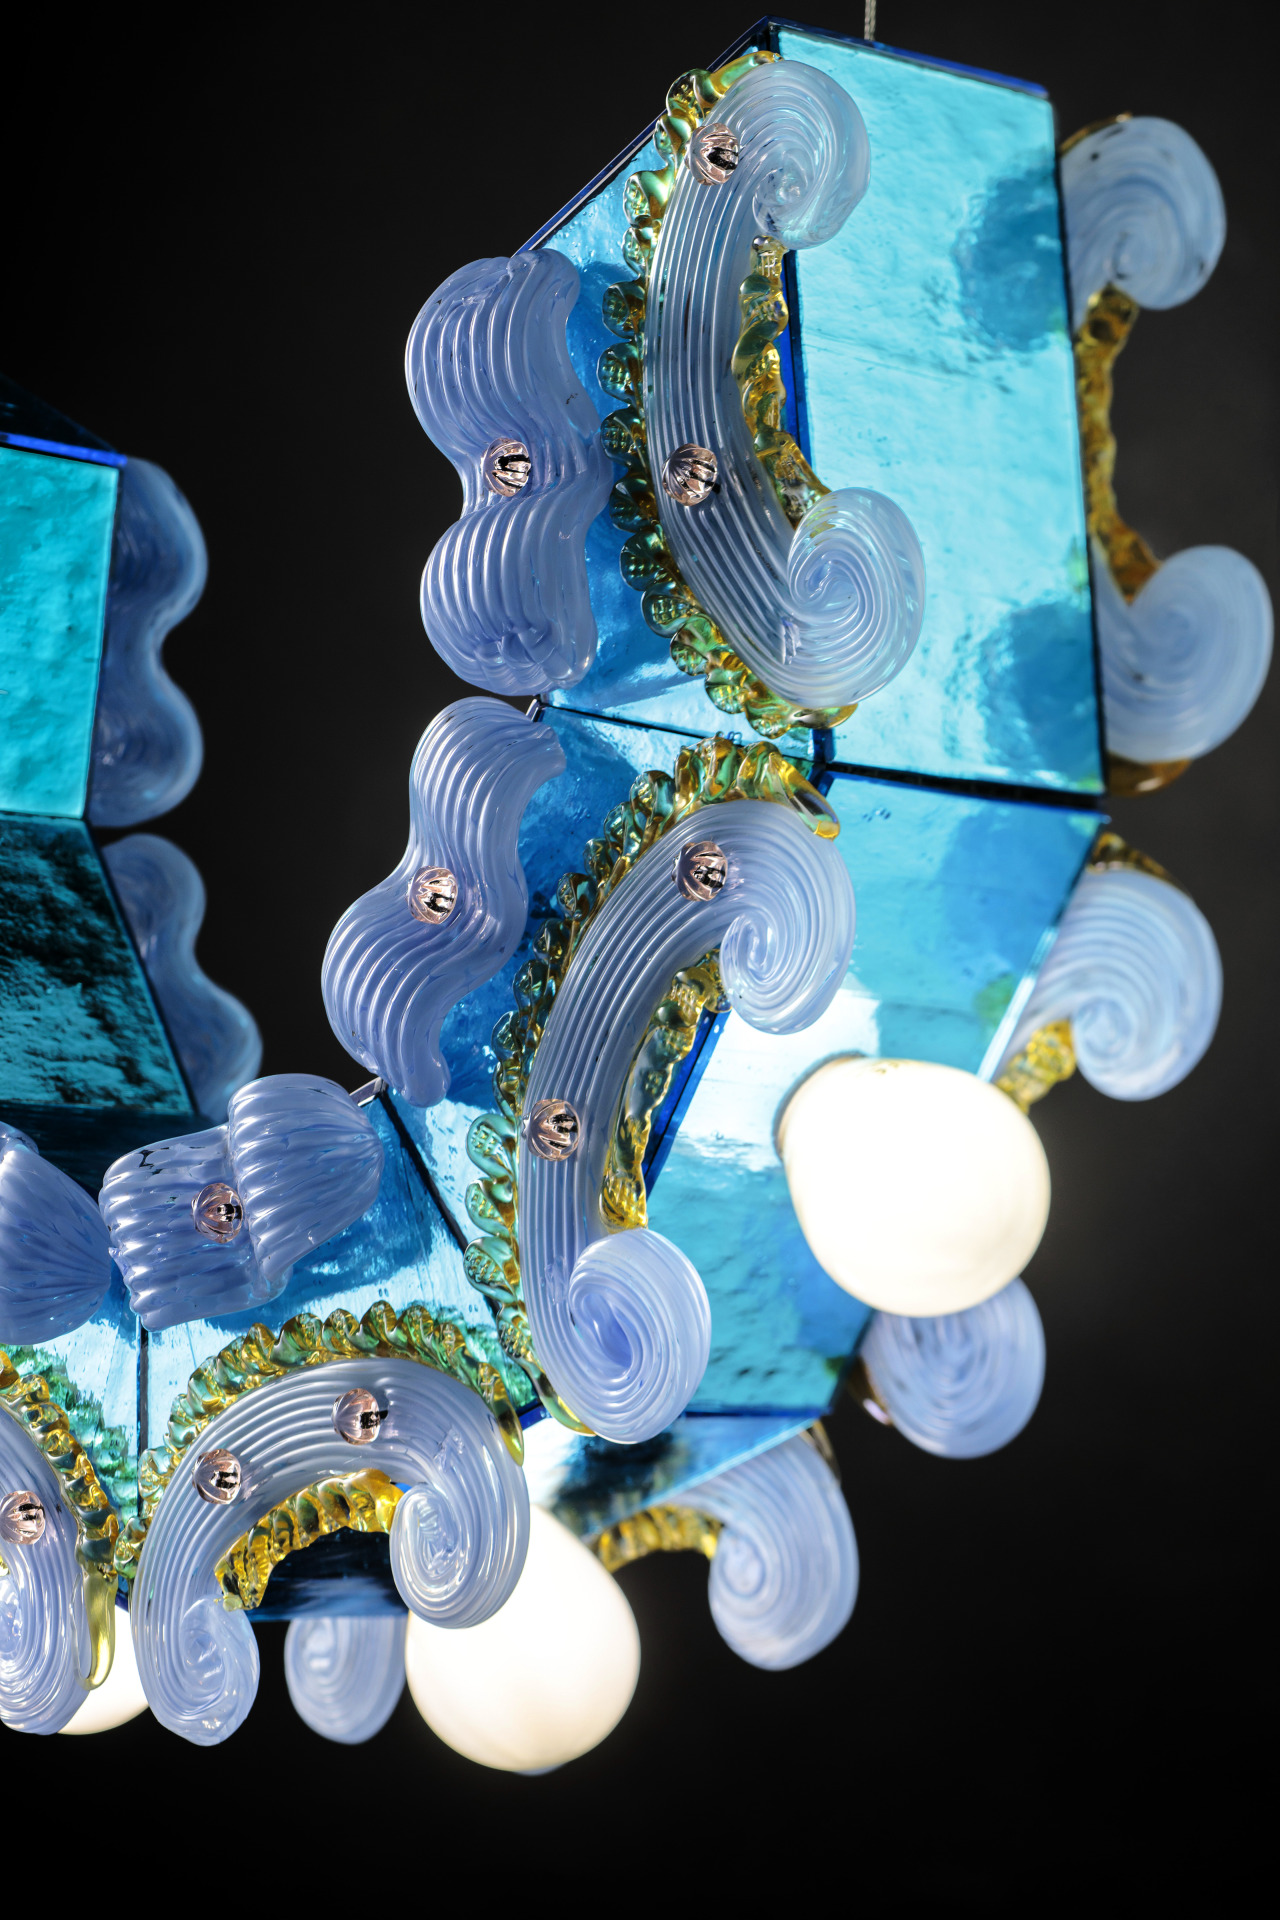 ToppingsA collection of four lamps made of tinted venetian mirrored glass combined with traditional decorative glass curls and pins, which are used as if they were a layer of cream, colored buttercream or thick frosting spread on a base as a garnish....